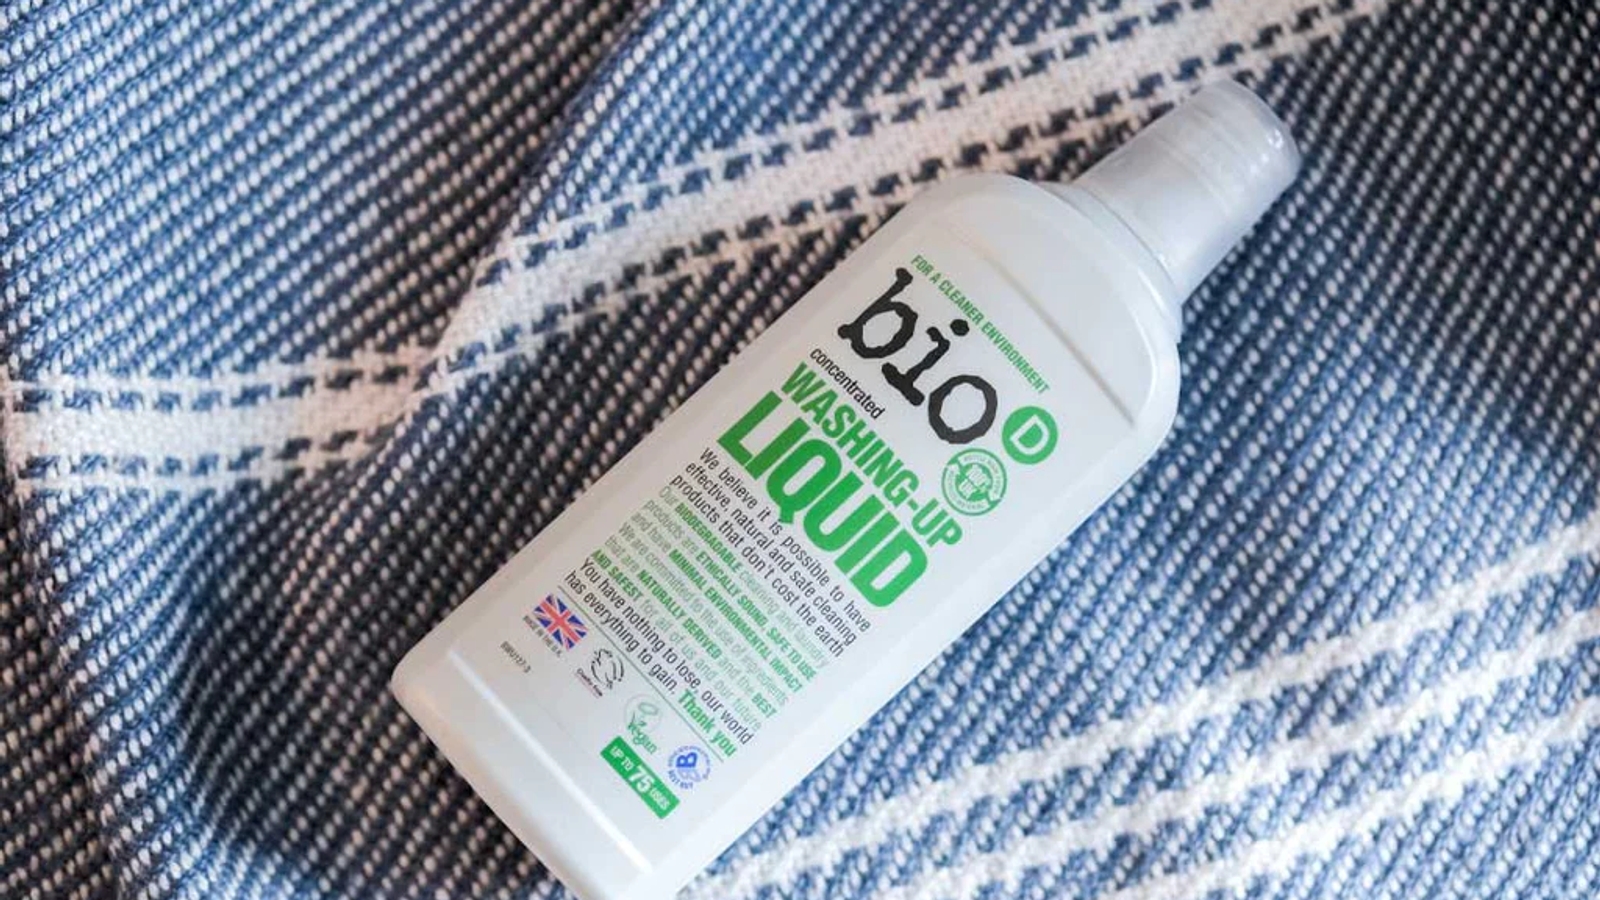 A bottle of bio-D washing up liquid on a blanket